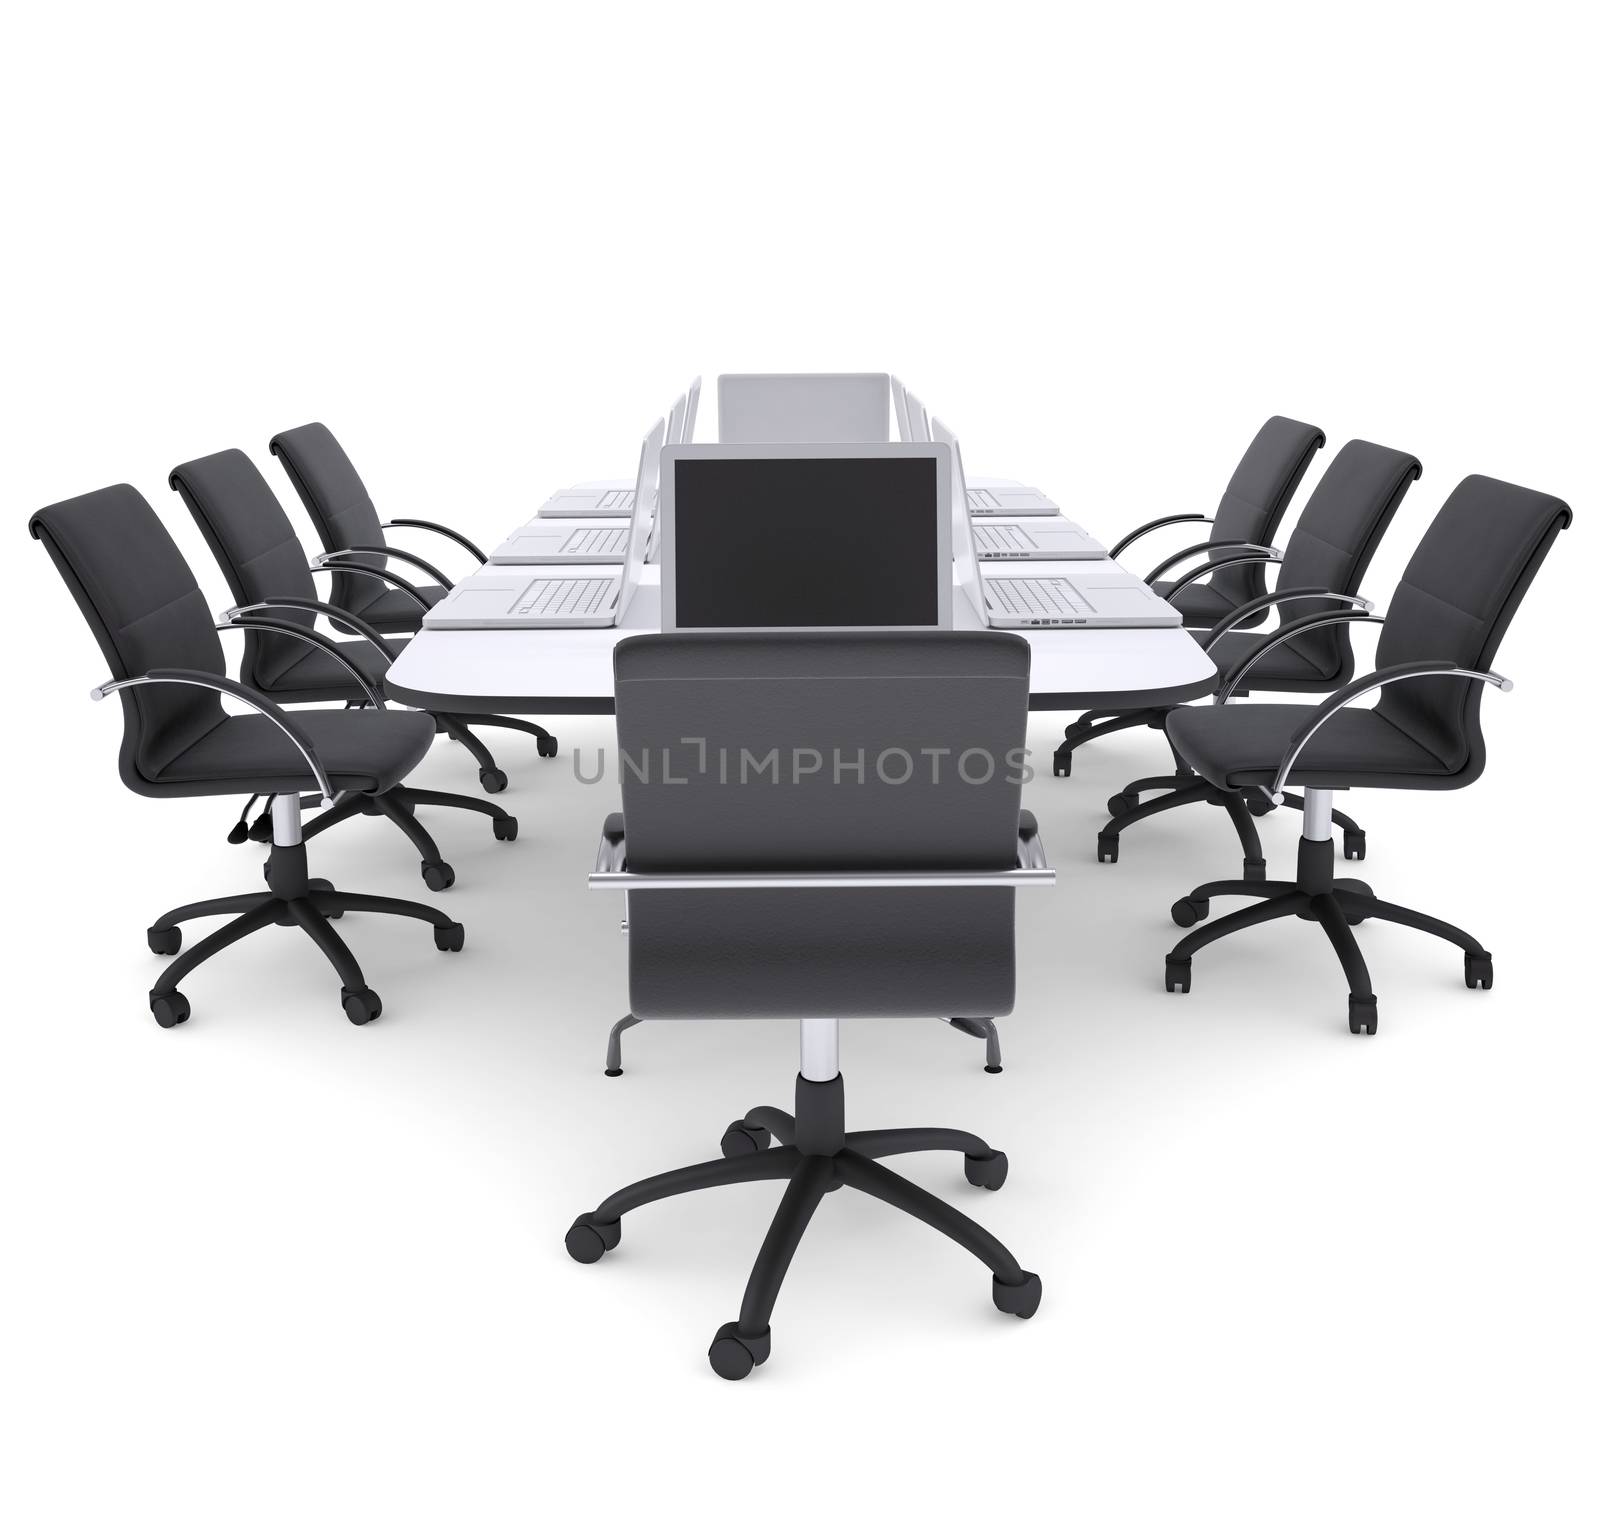 Laptops on the office round table and chairs. Isolated render on a white background